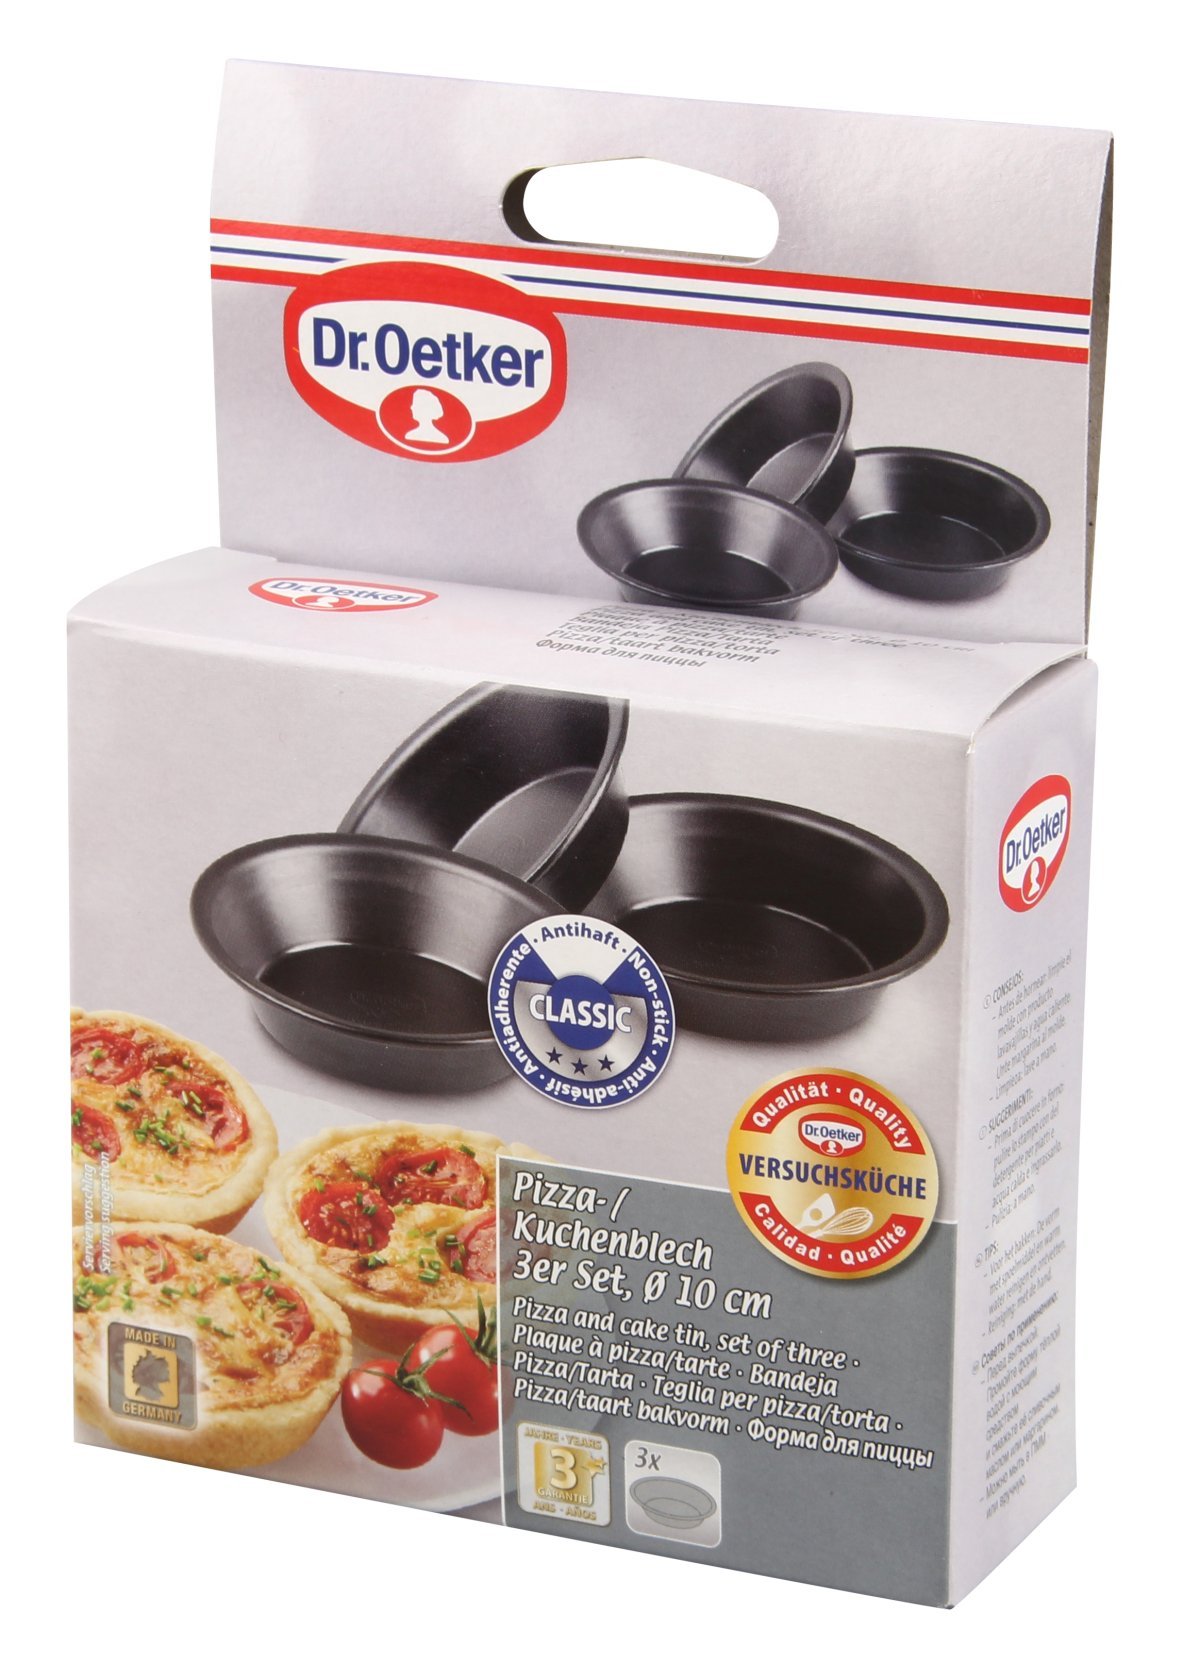 Dr.Oetker "Classic" Cake/Pizza Tray (Set Of 3)